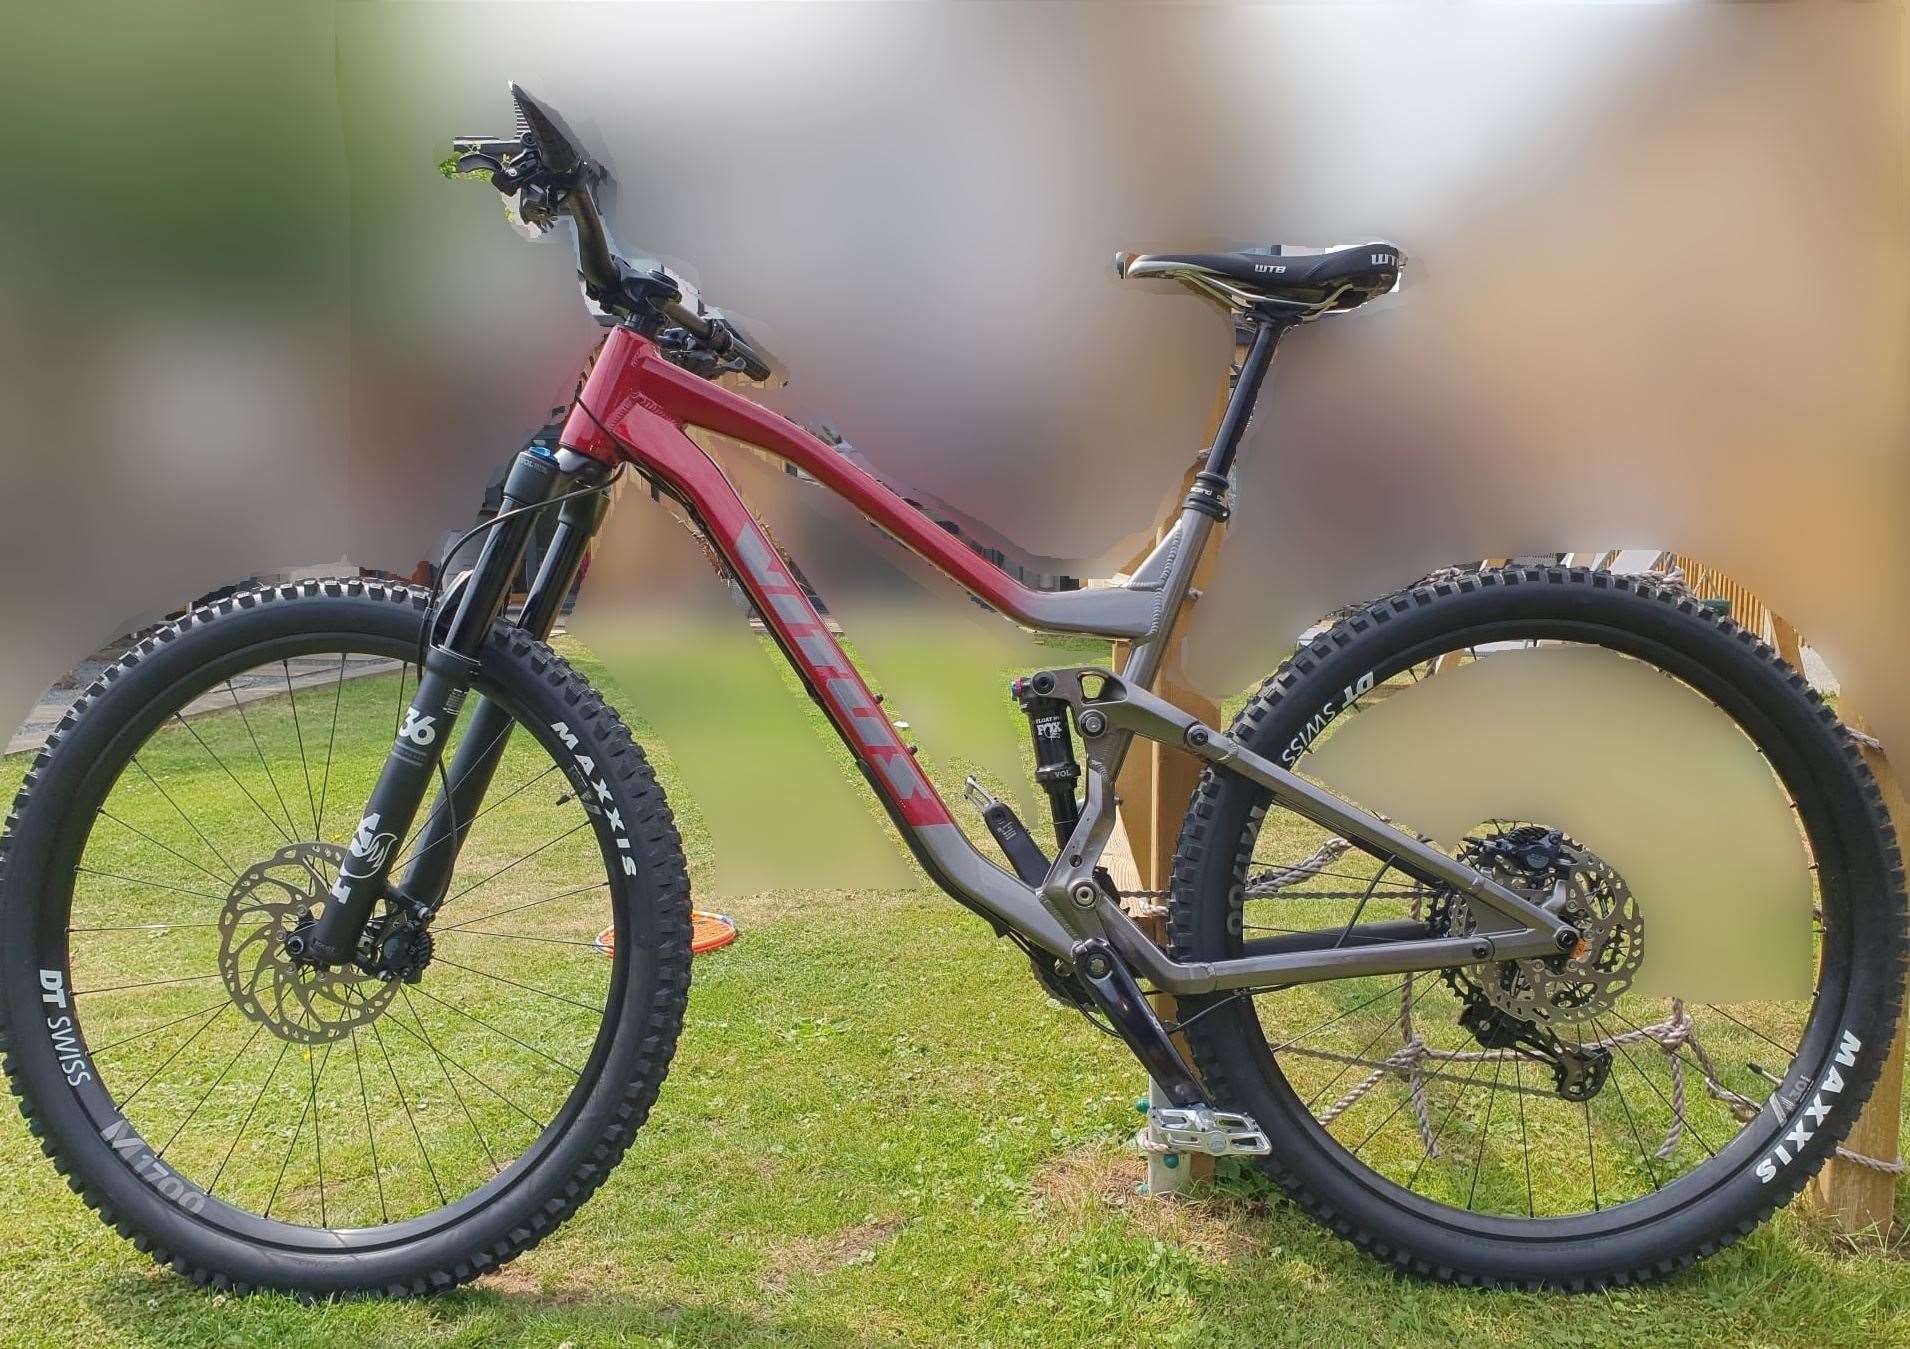 The mountain bike was stolen between Thursday evening and Friday morning in Herne Bay. Picture: Kent Police